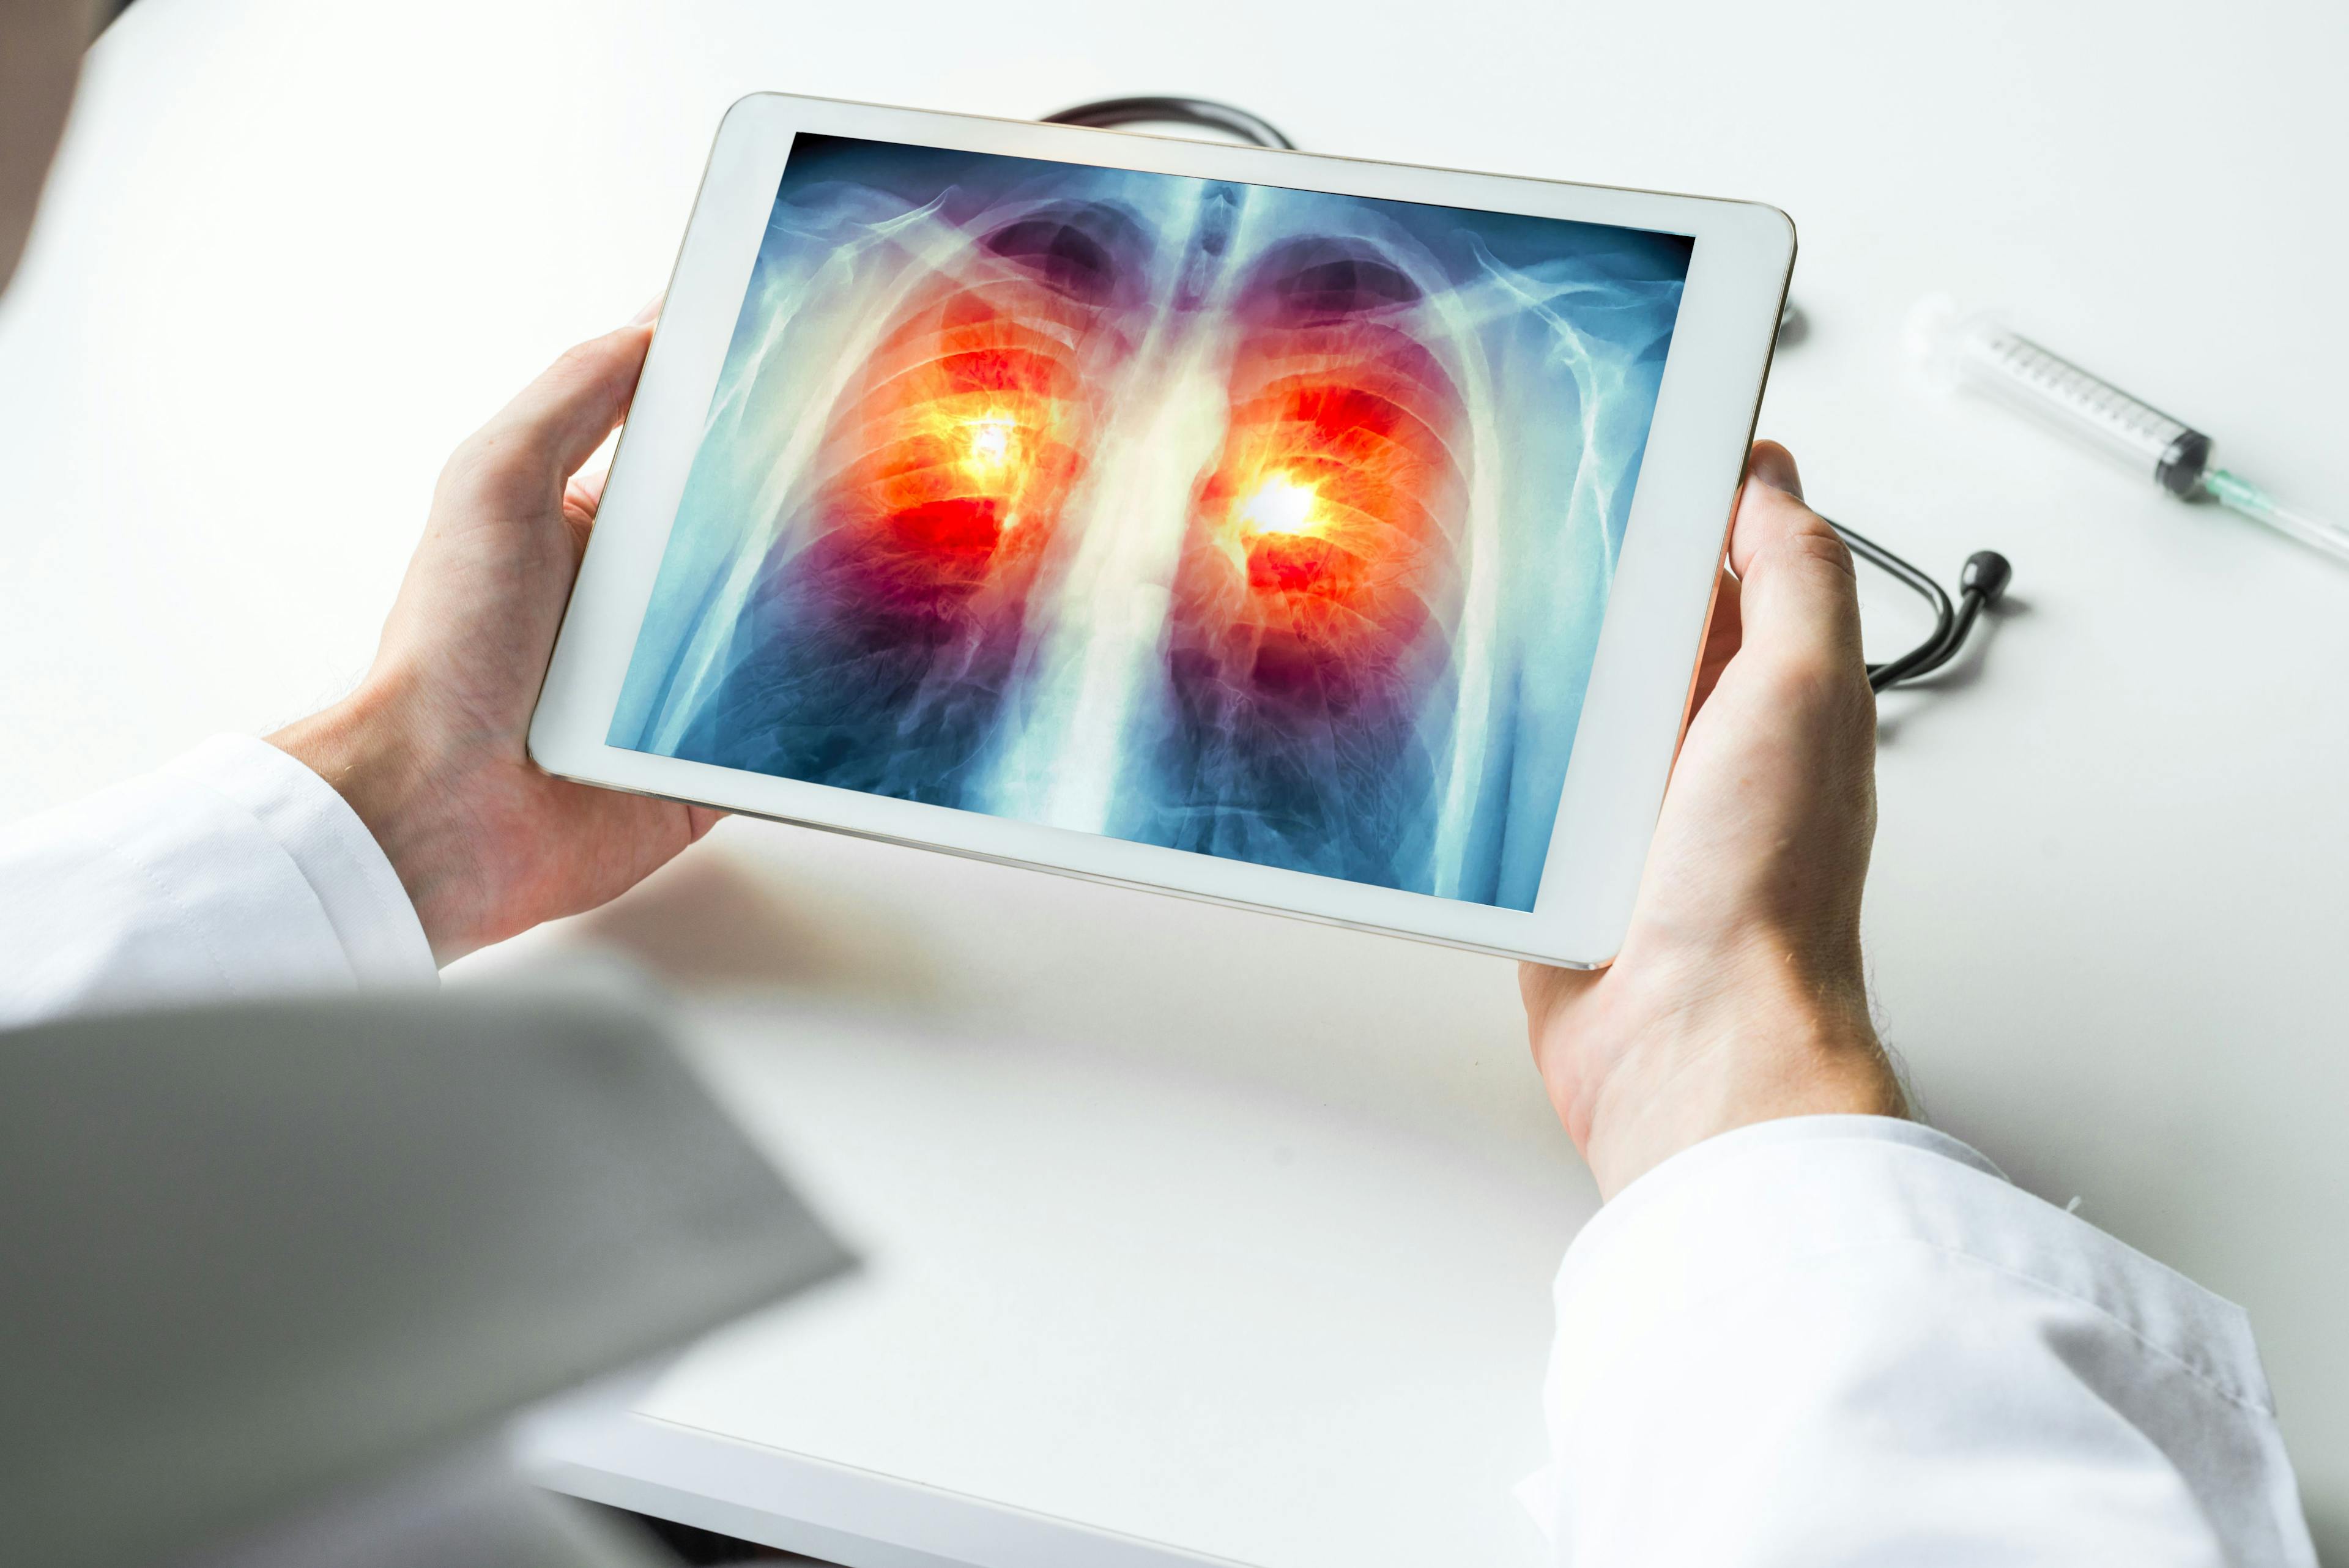 Doctor watching a xray of lung cancer on digital tablet. Radiology concept | Image Credit: steph photographies - stock.adobe.com